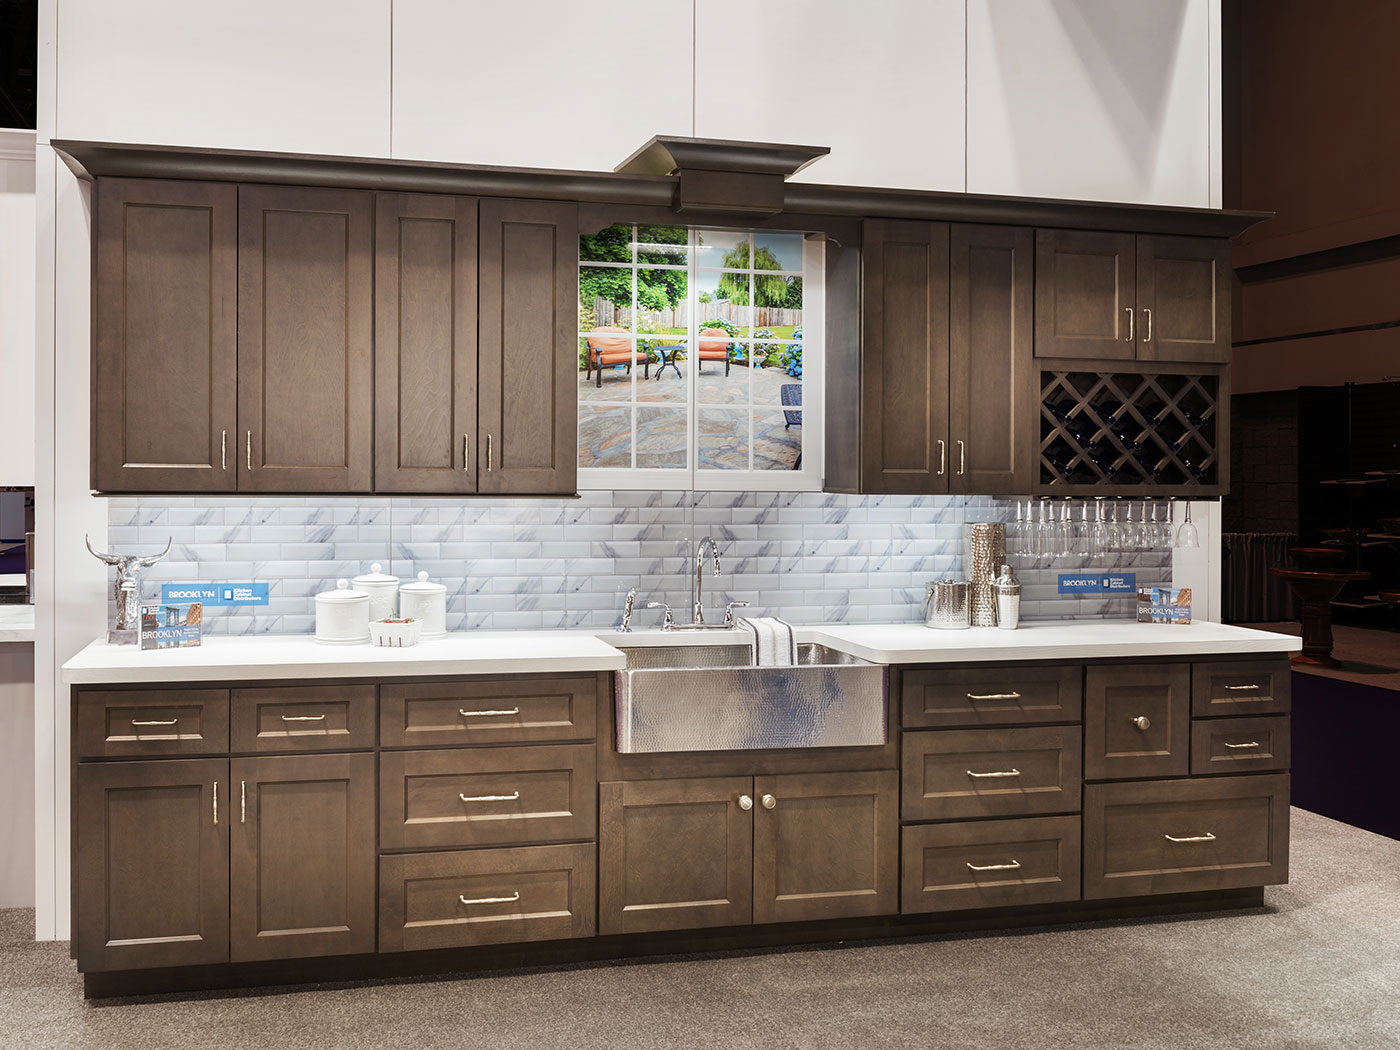 Standard Kitchen Cabinets Brooklyn White and Slate - Craftworks Custom Cabinetry